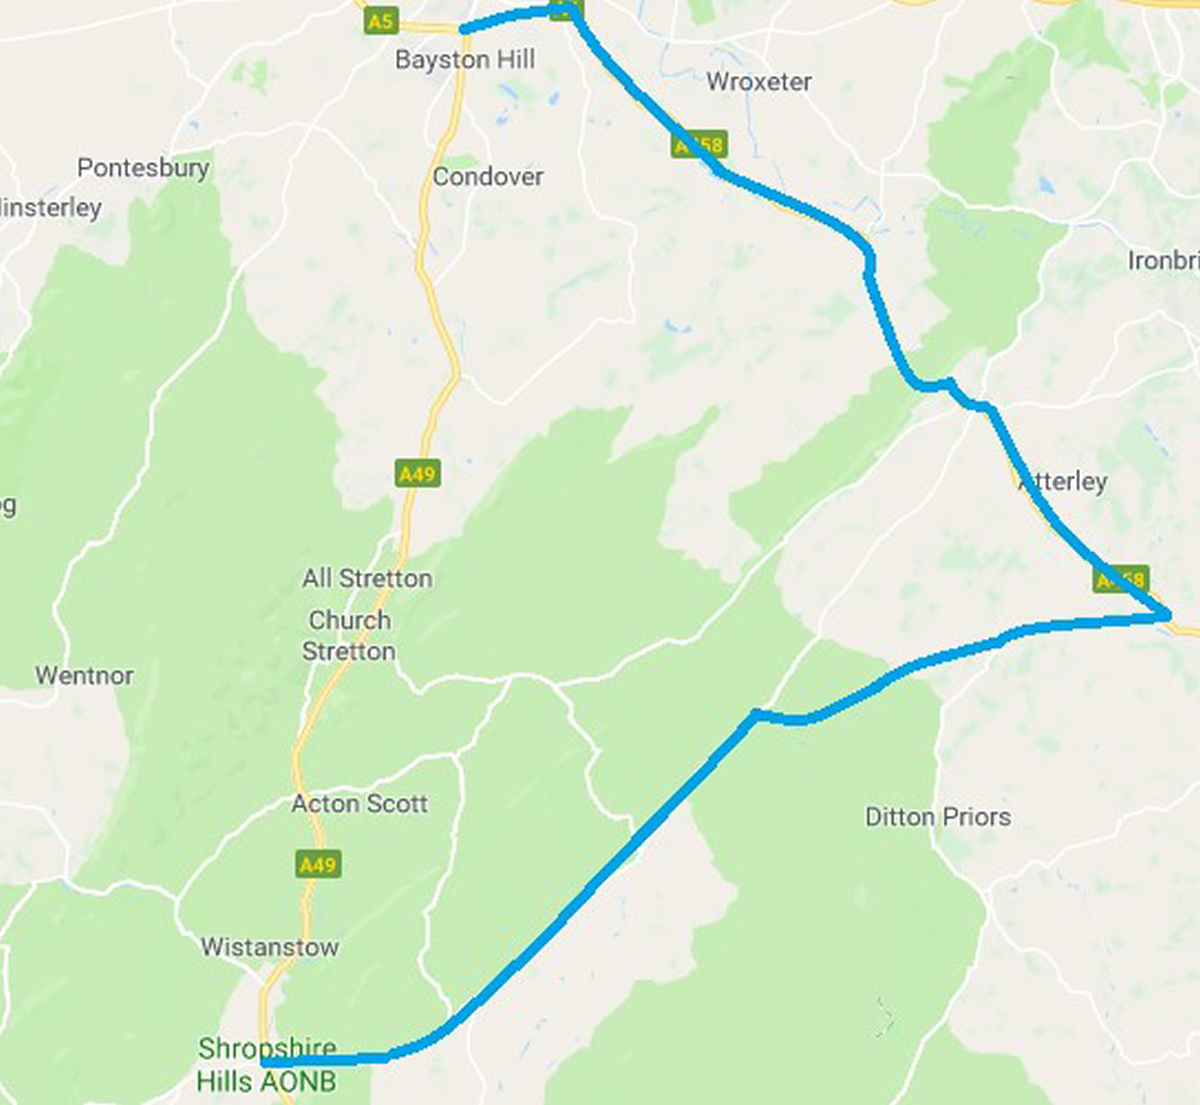 Southbound diversion route for A49